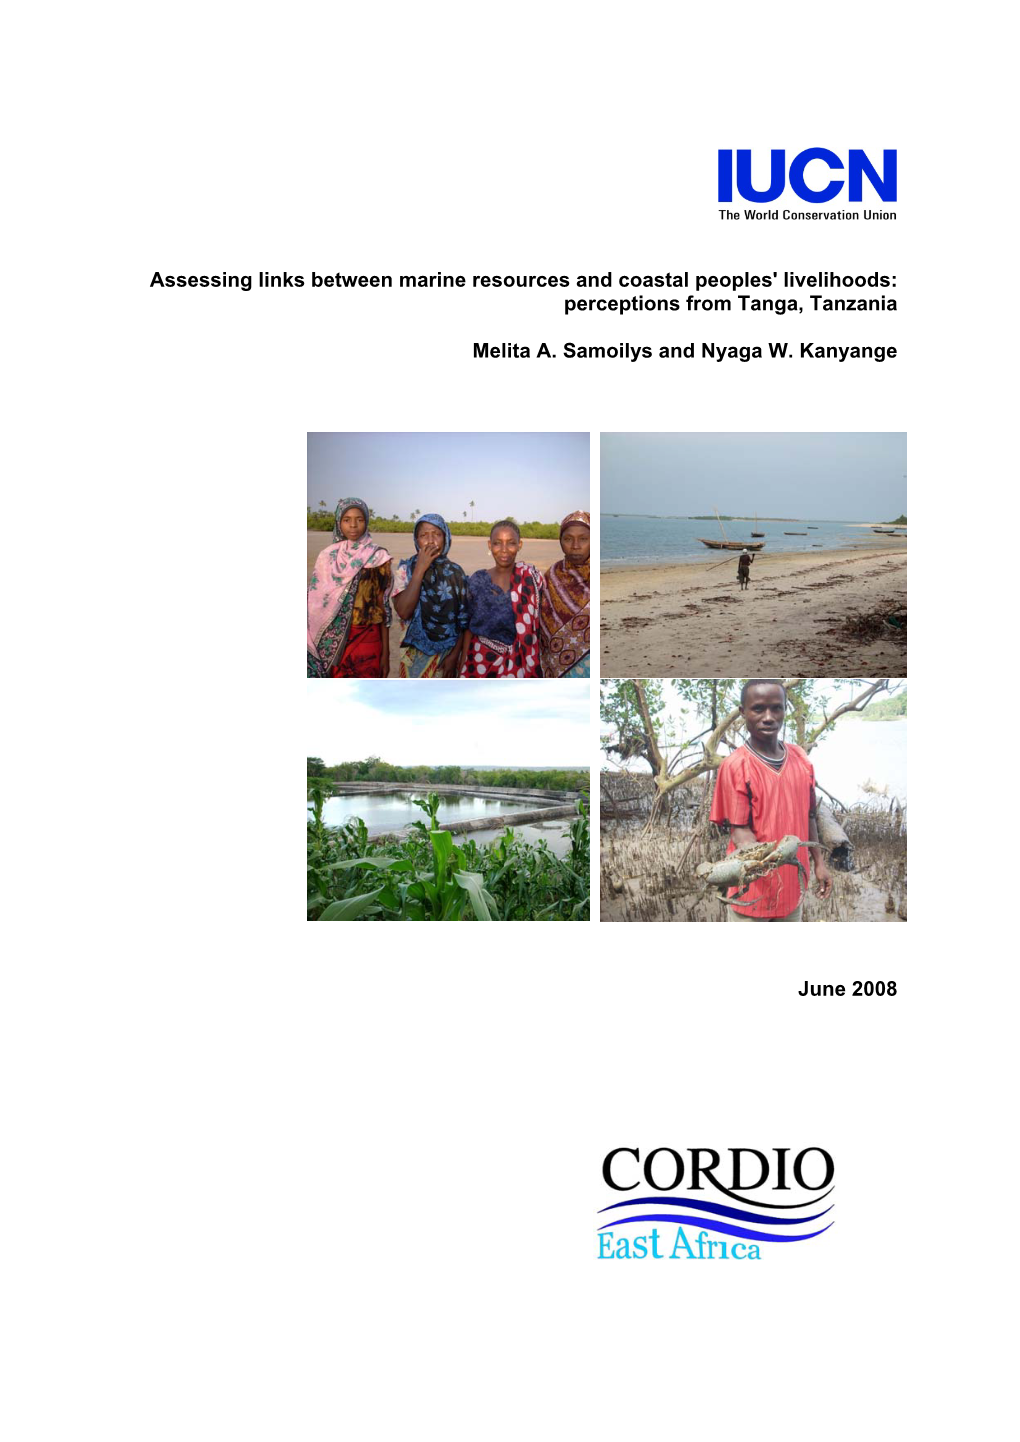 Assessing Links Between Marine Resources and Coastal Peoples' Livelihoods: Perceptions from Tanga, Tanzania